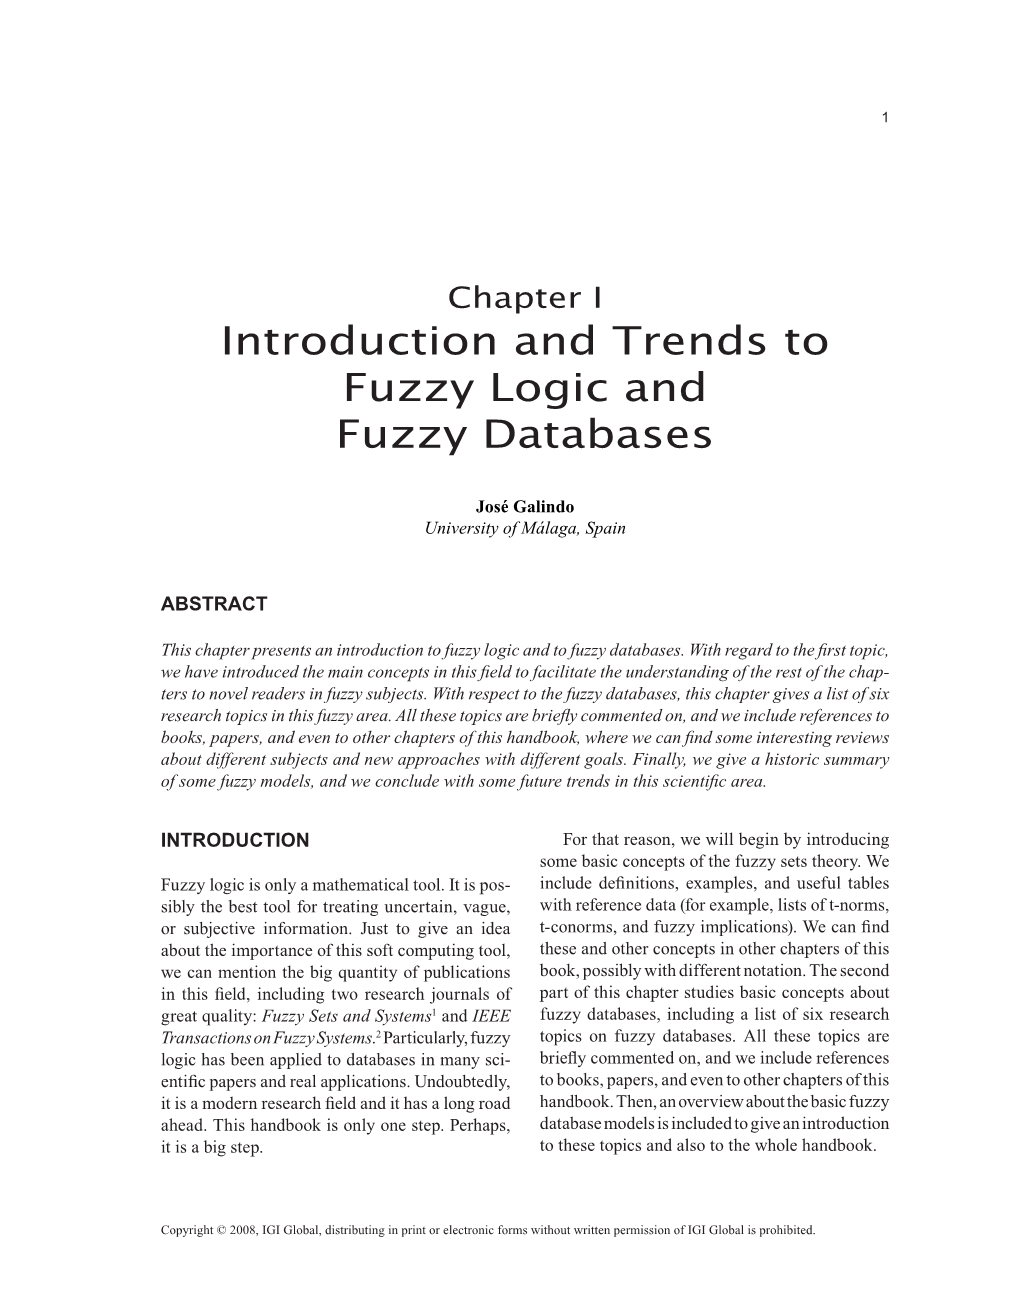 Introduction and Trends to Fuzzy Logic and Fuzzy Databases